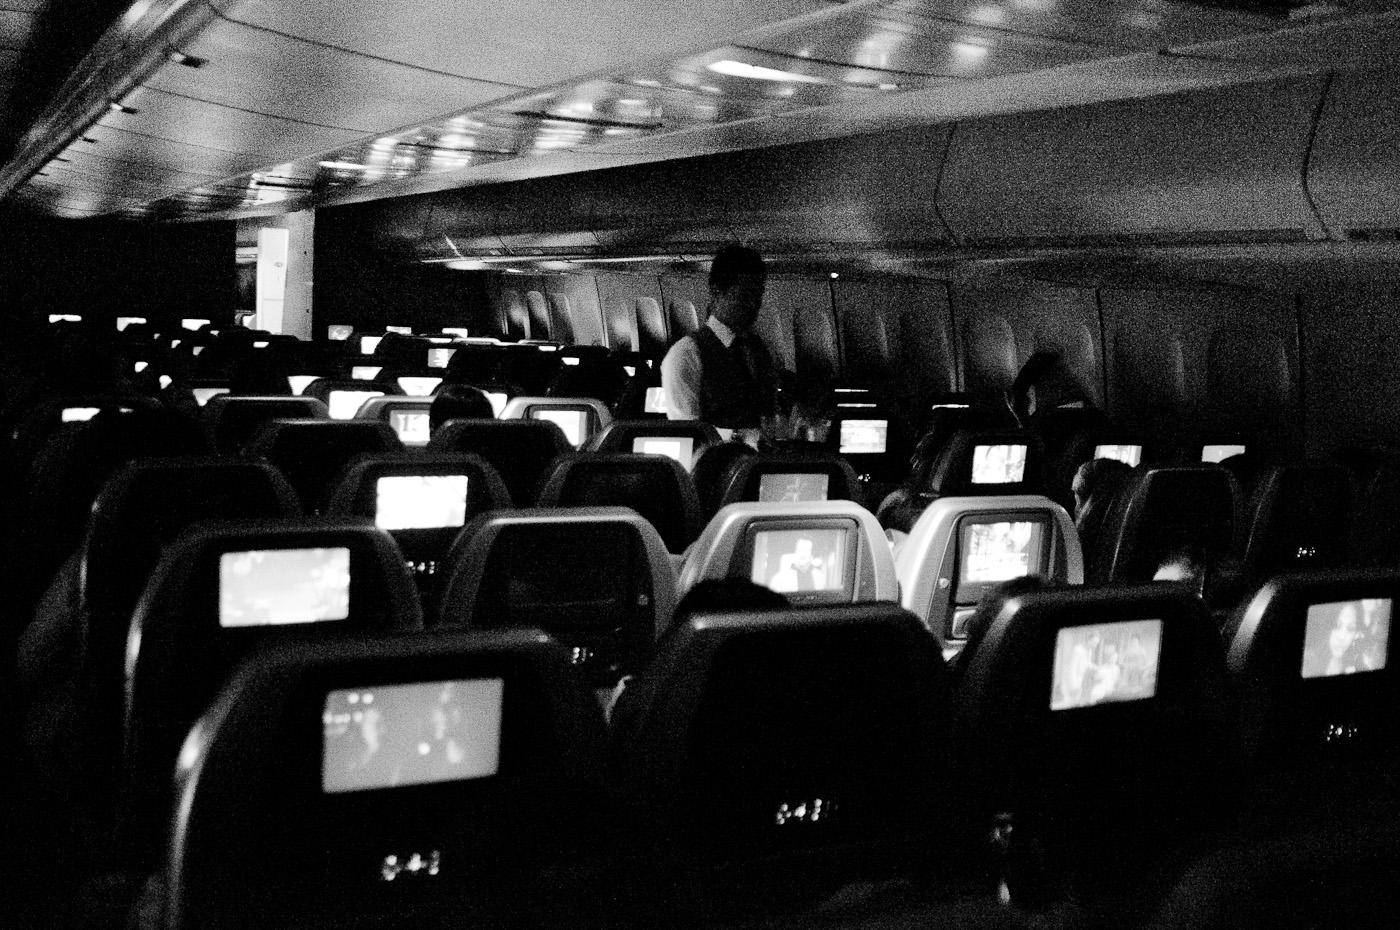 A very gritty but beautiful picture inside a commercial flight at 25600ISO. Sony NEX-5n